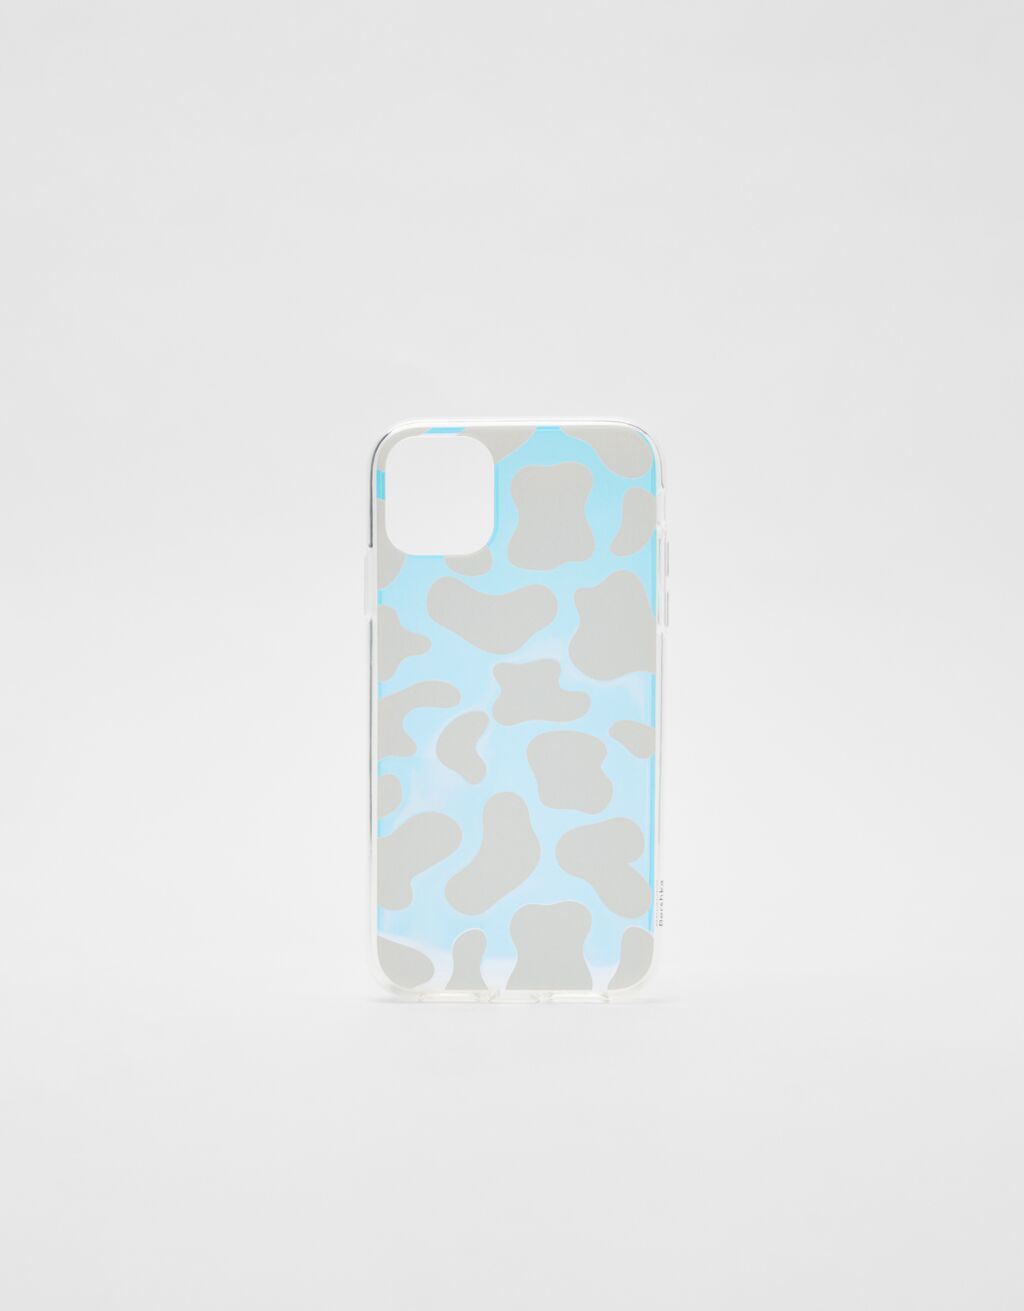 Mobile phone case with iridescent effect and cow print